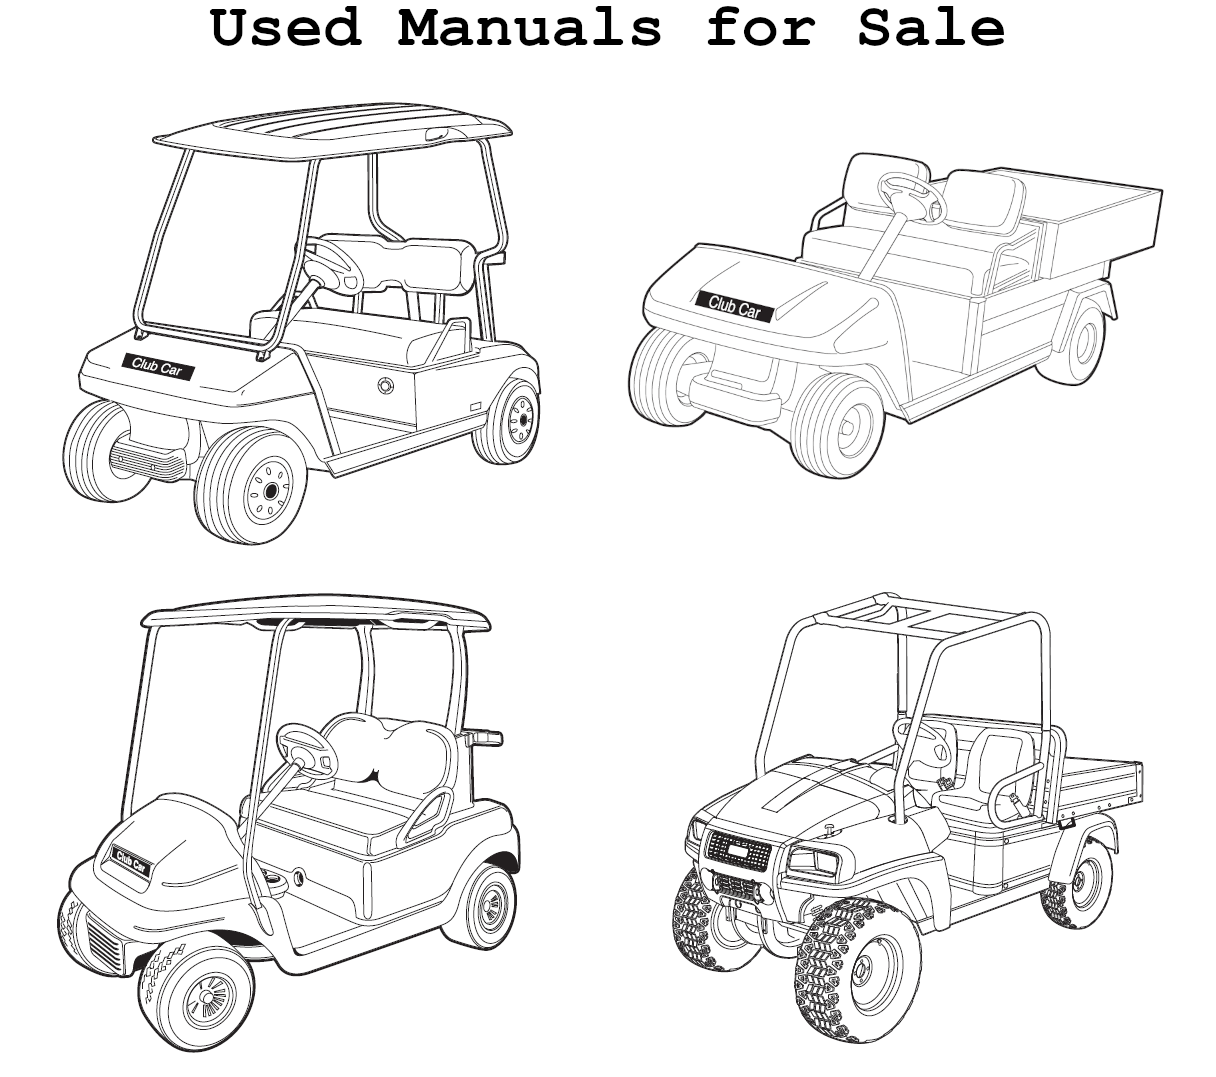 Manuals For Sale